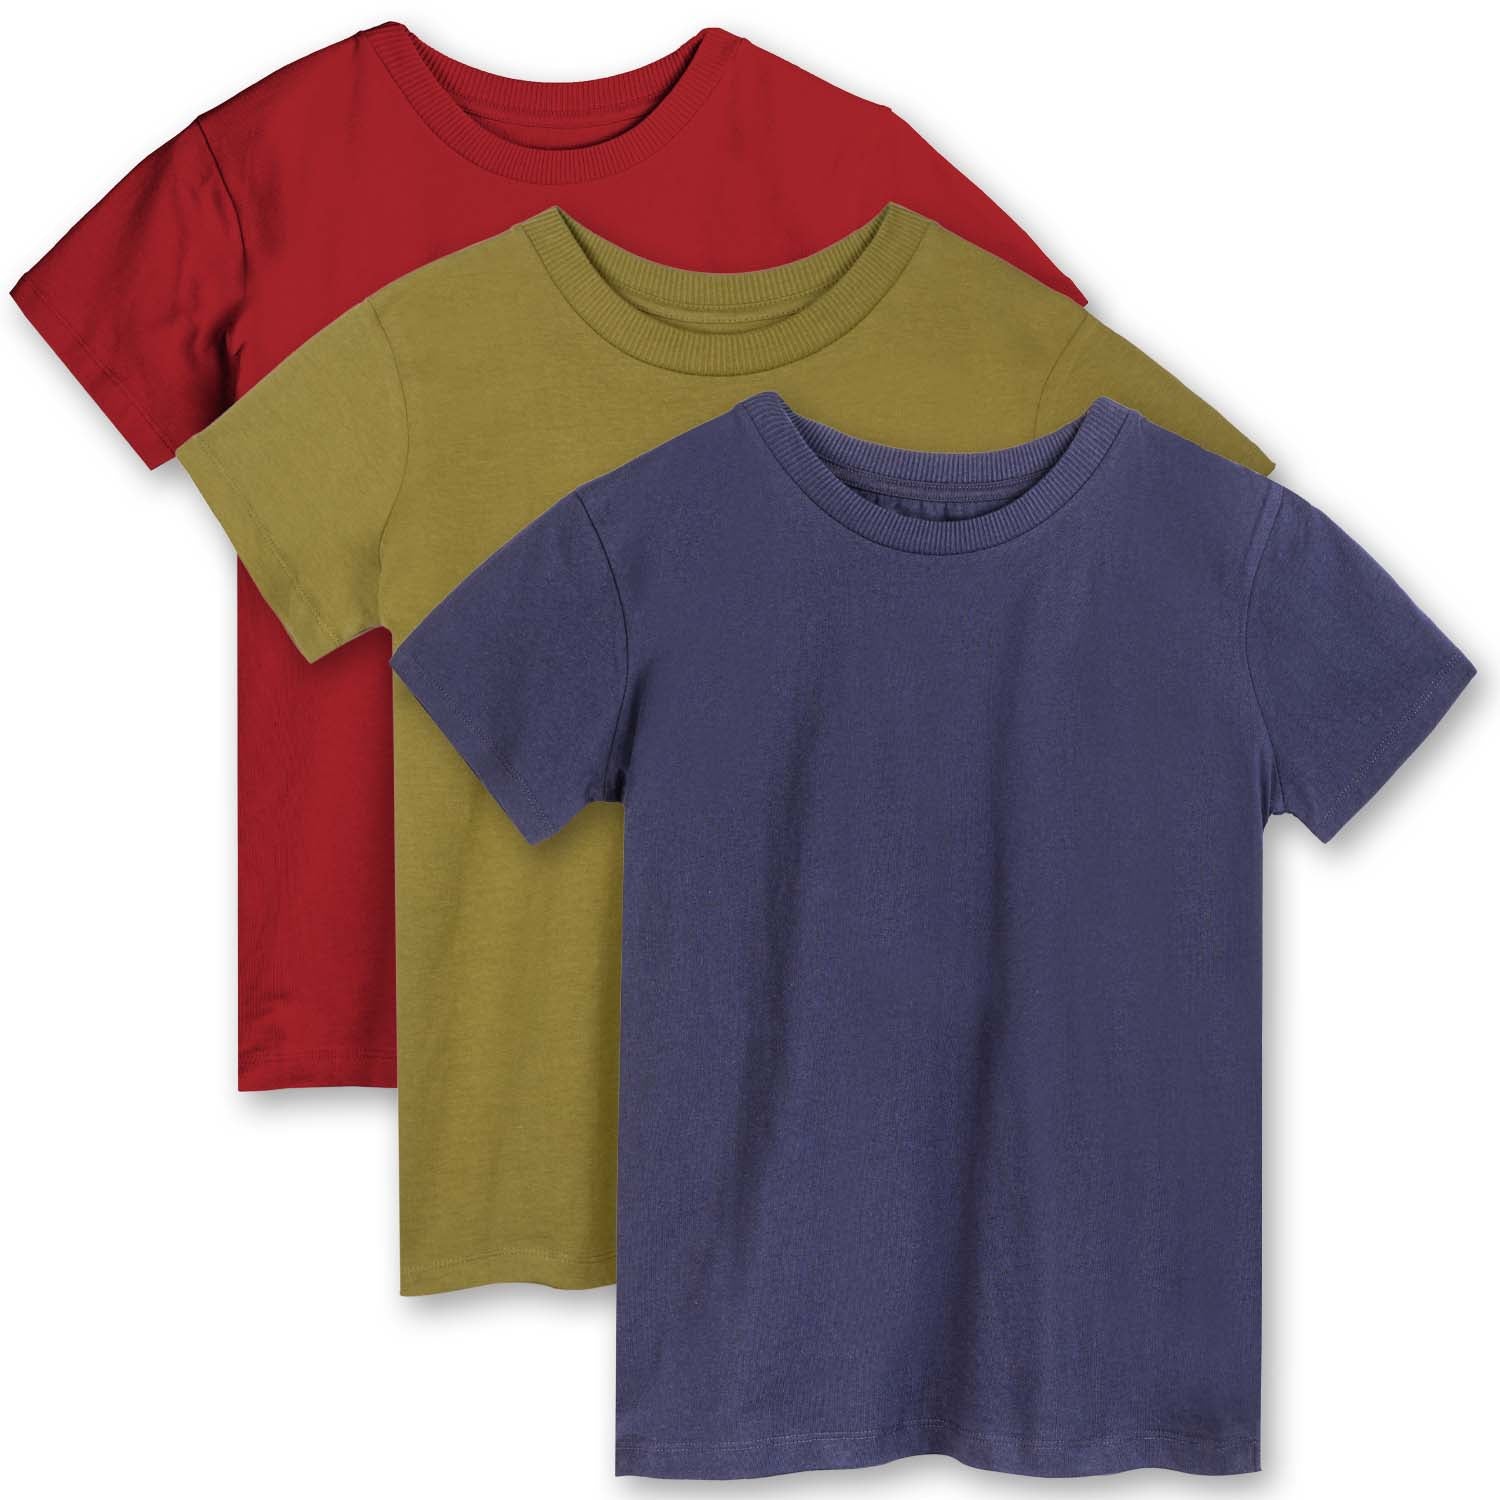 Image of Organic Cotton Kids Shirts - Relaxed Fit Tee 3 Pack